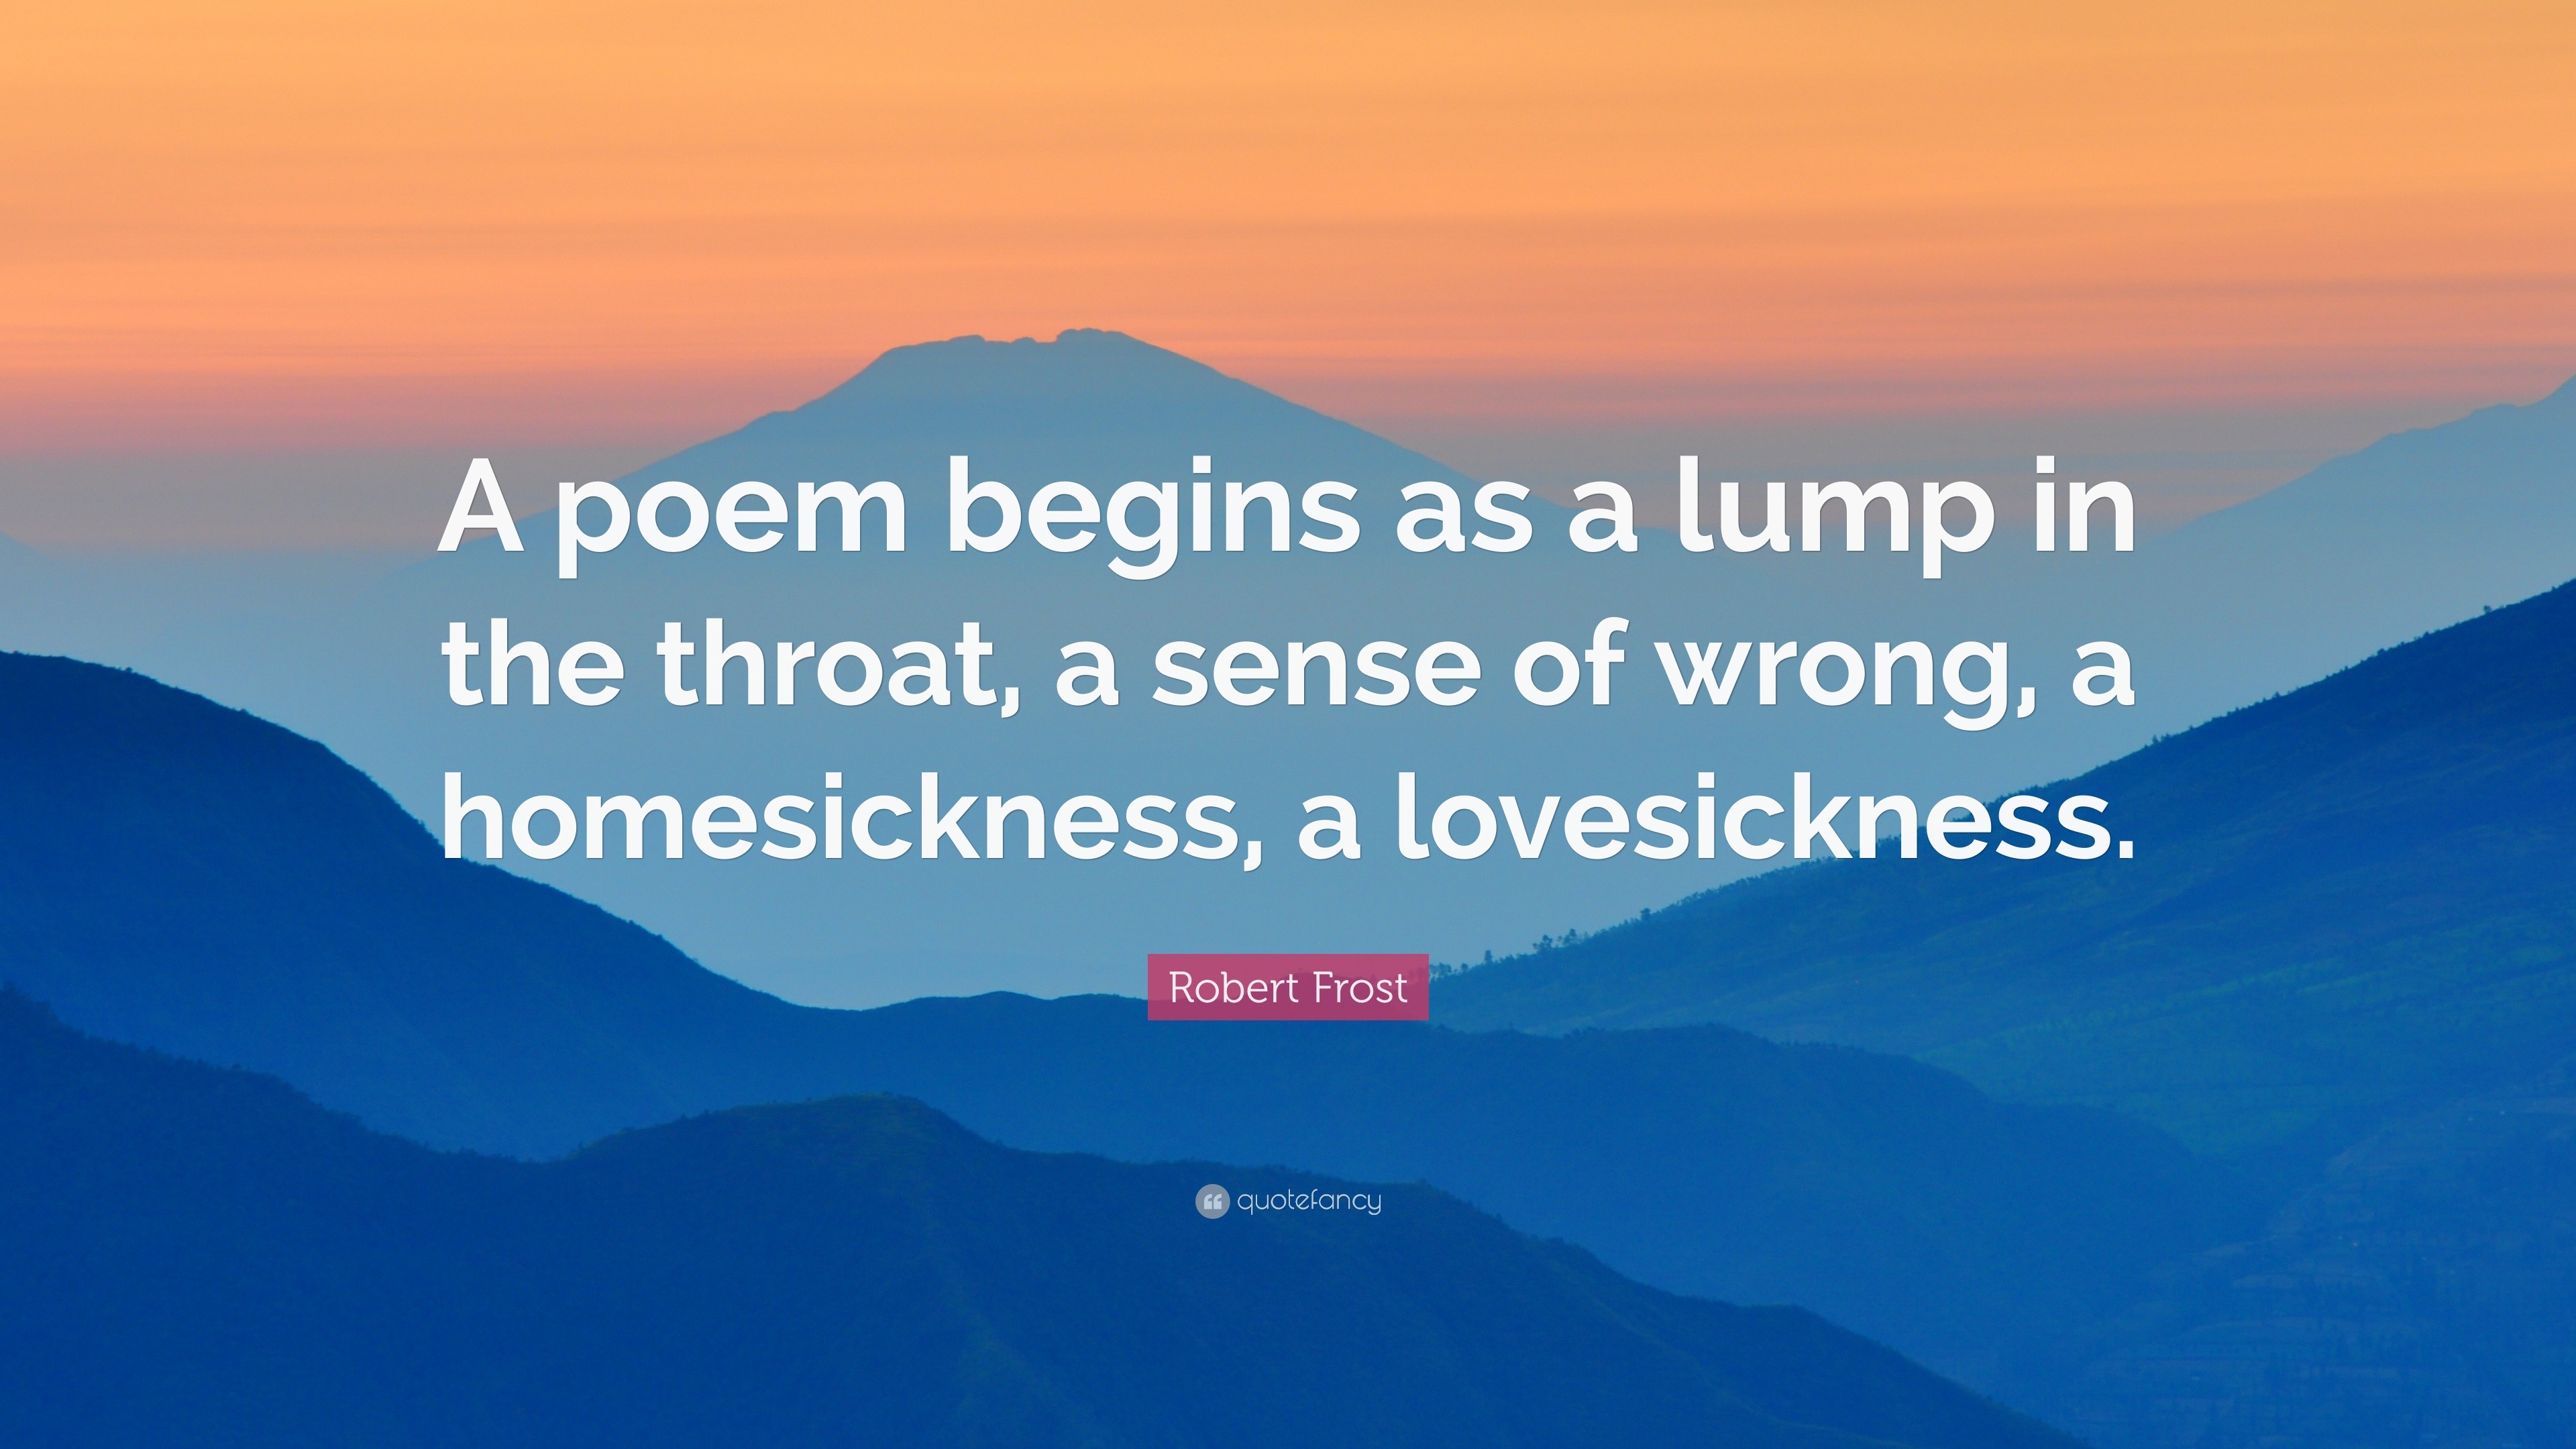 Robert Frost Quote: “A poem begins as a lump in the throat, a sense of ...